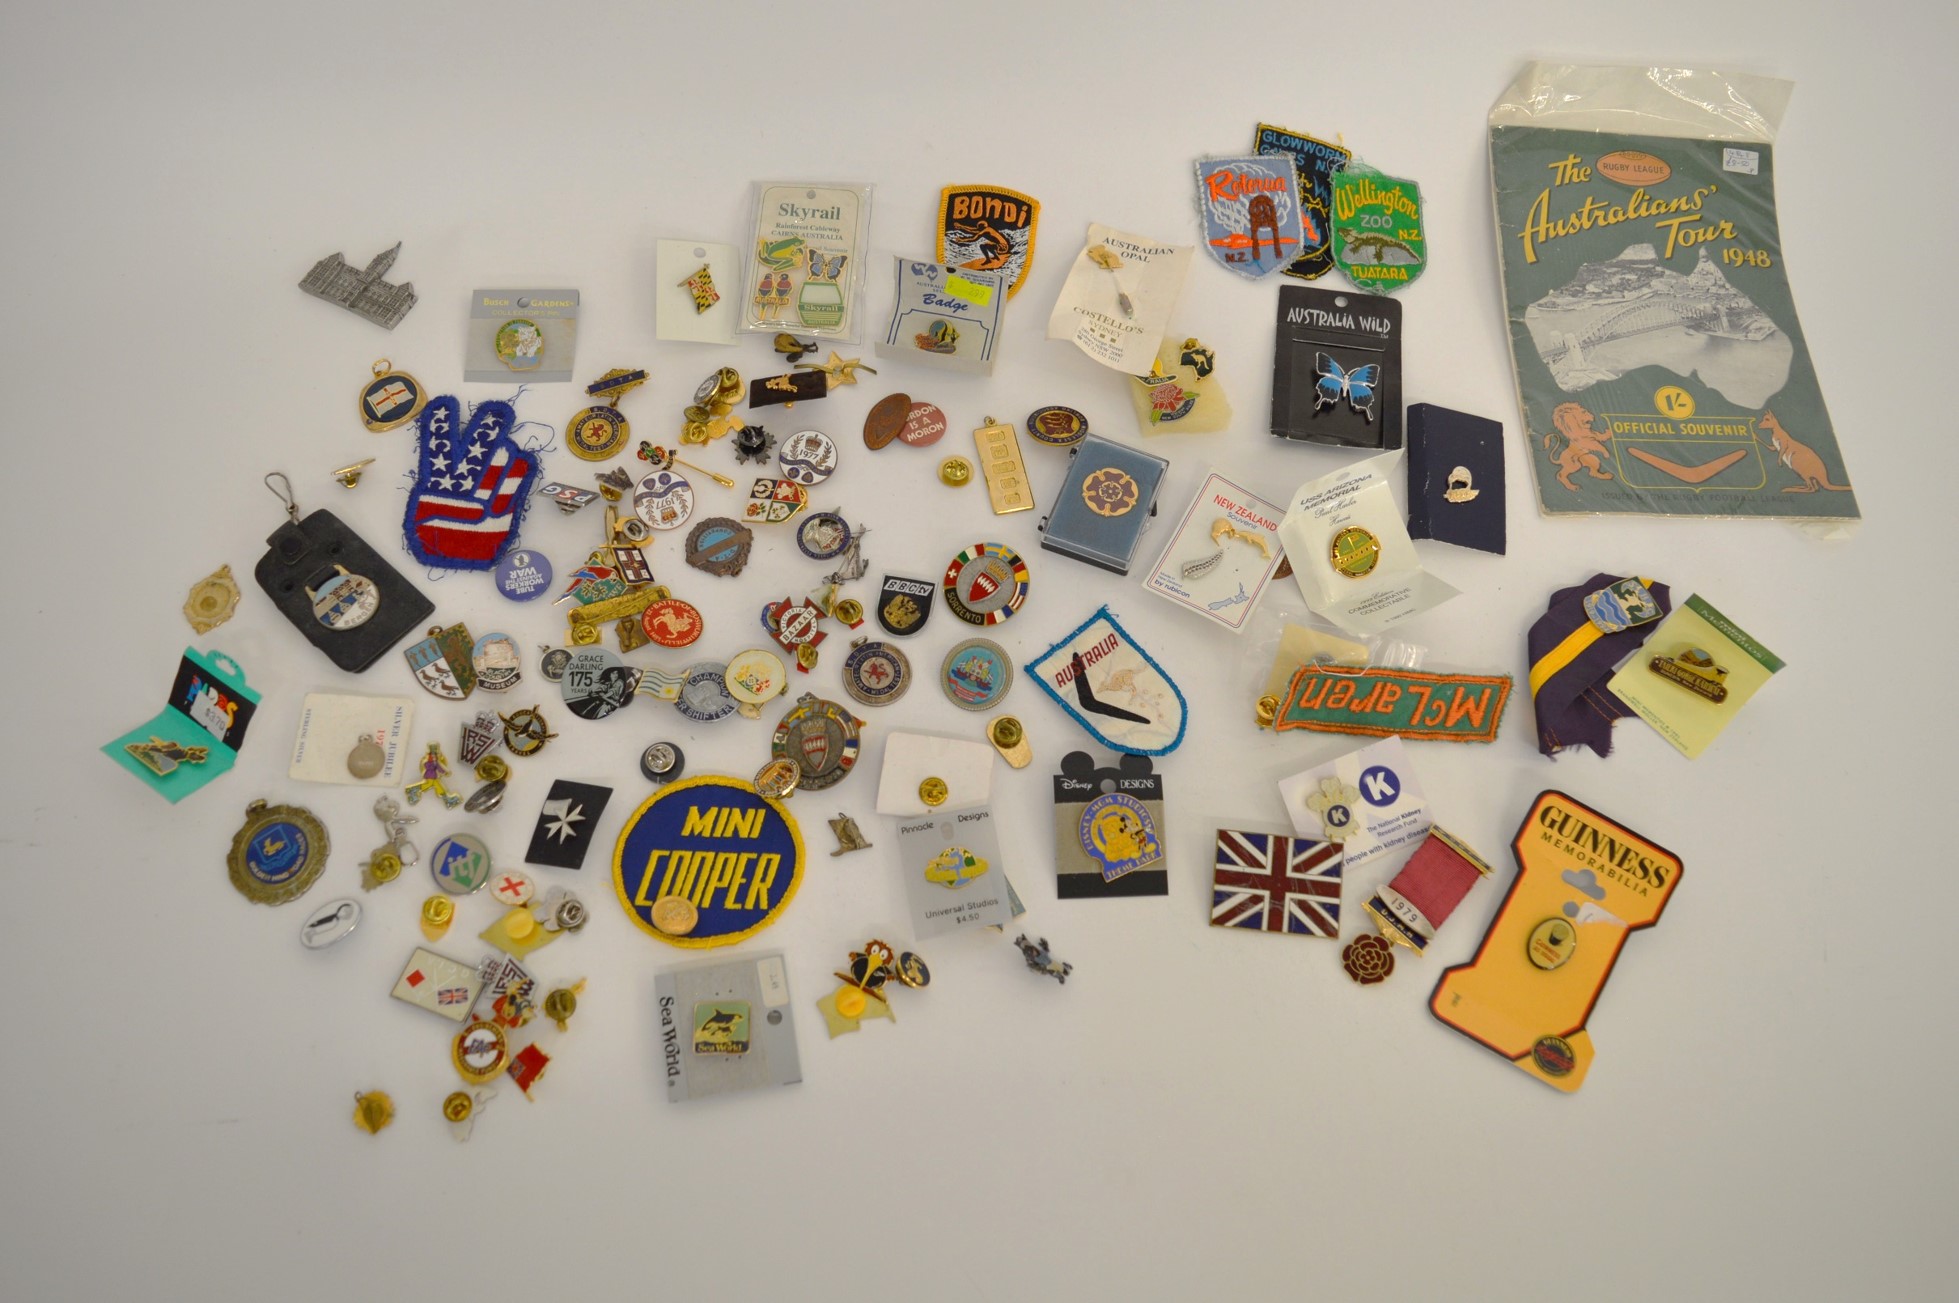 A collection of miscellaneous base metal and enamel badges, and buttons including various New